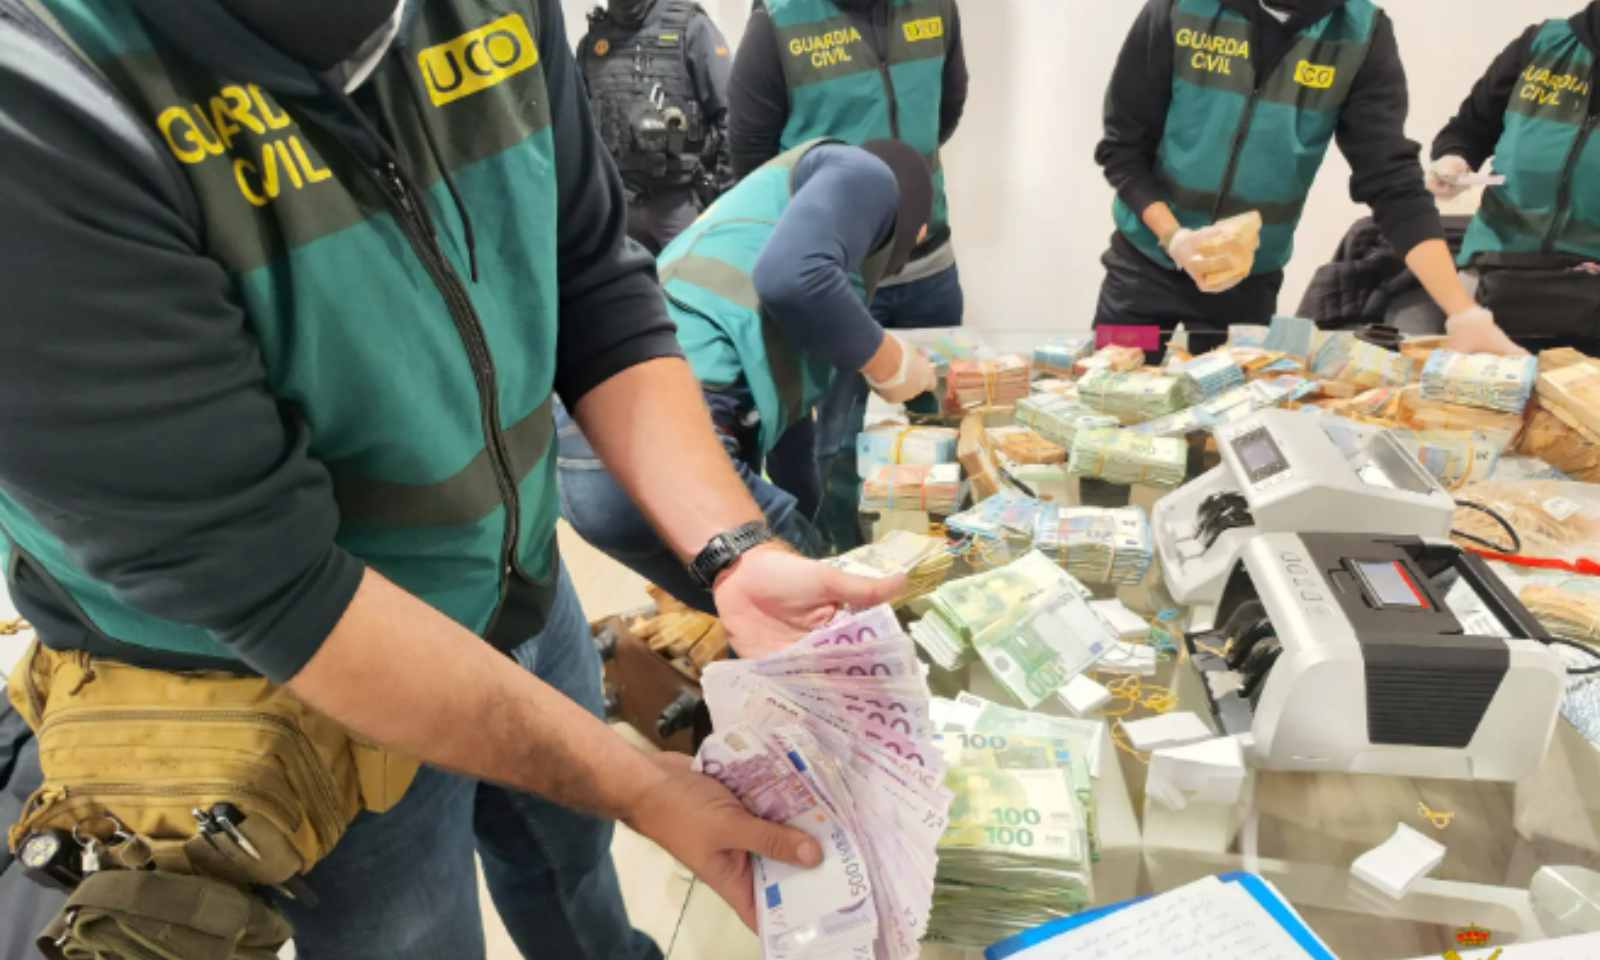 From Luxury Yachts to Cocaine Labs: Inside Spain's Major Drug Operation